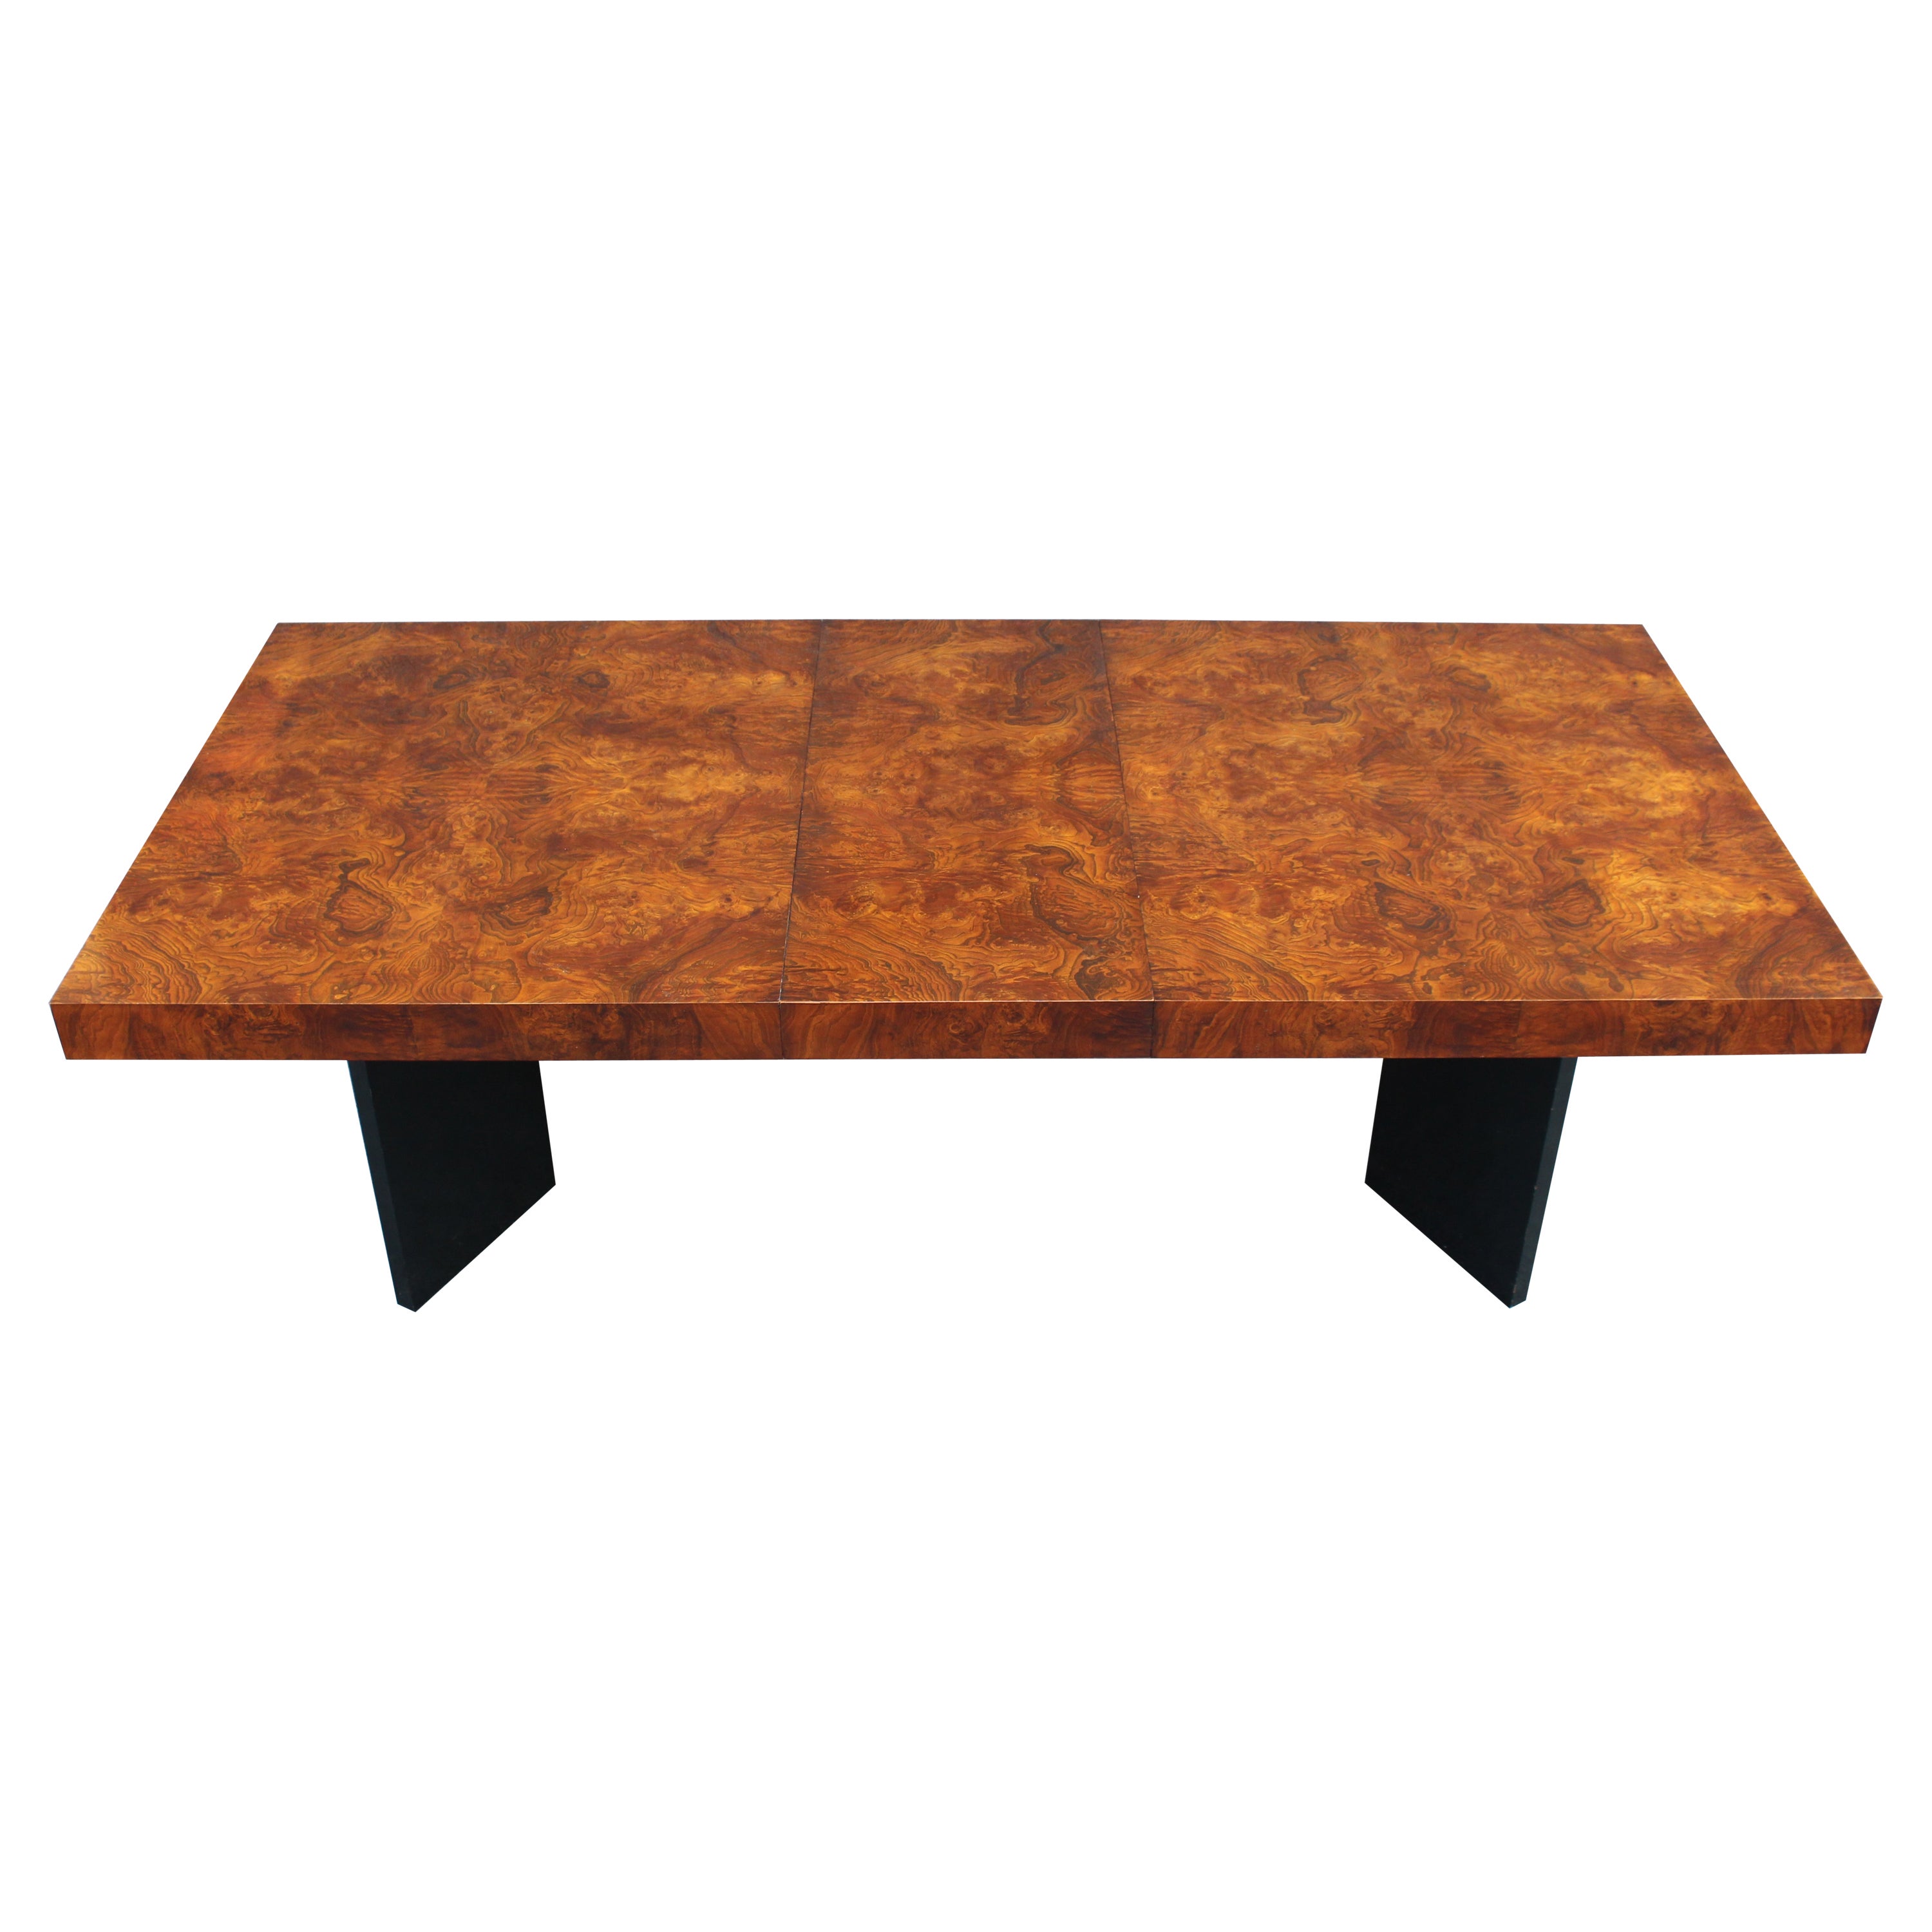 Milo Baughman Attr. Walnut Burl Large Dining Table with Extension Leaf For Sale